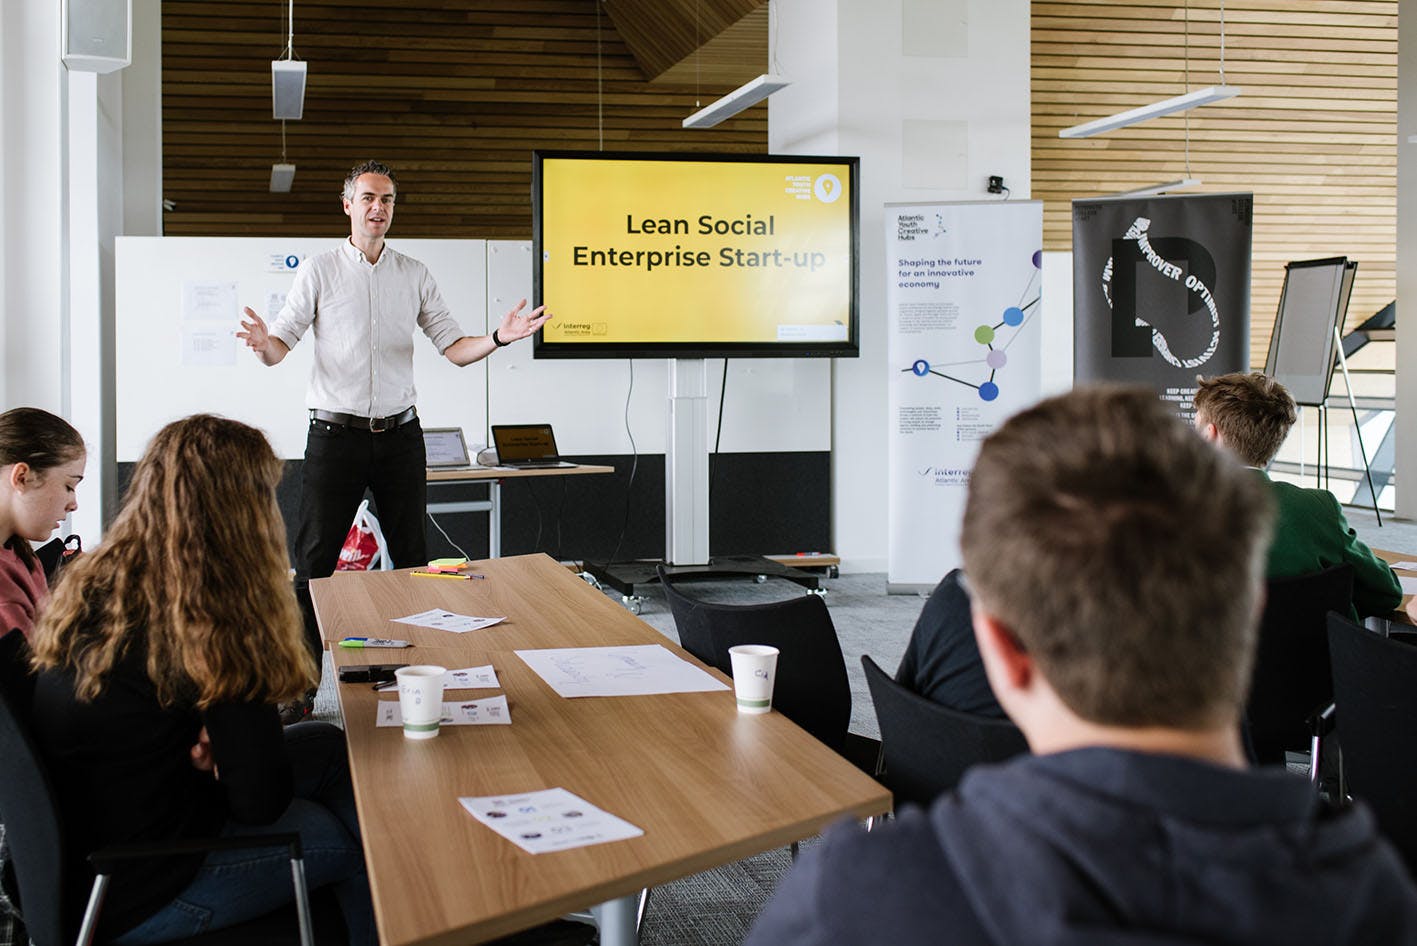 A man standing next to a screen showing a yellow slide talks to a group of people sat around a desk AYCH Hackfest June 2019